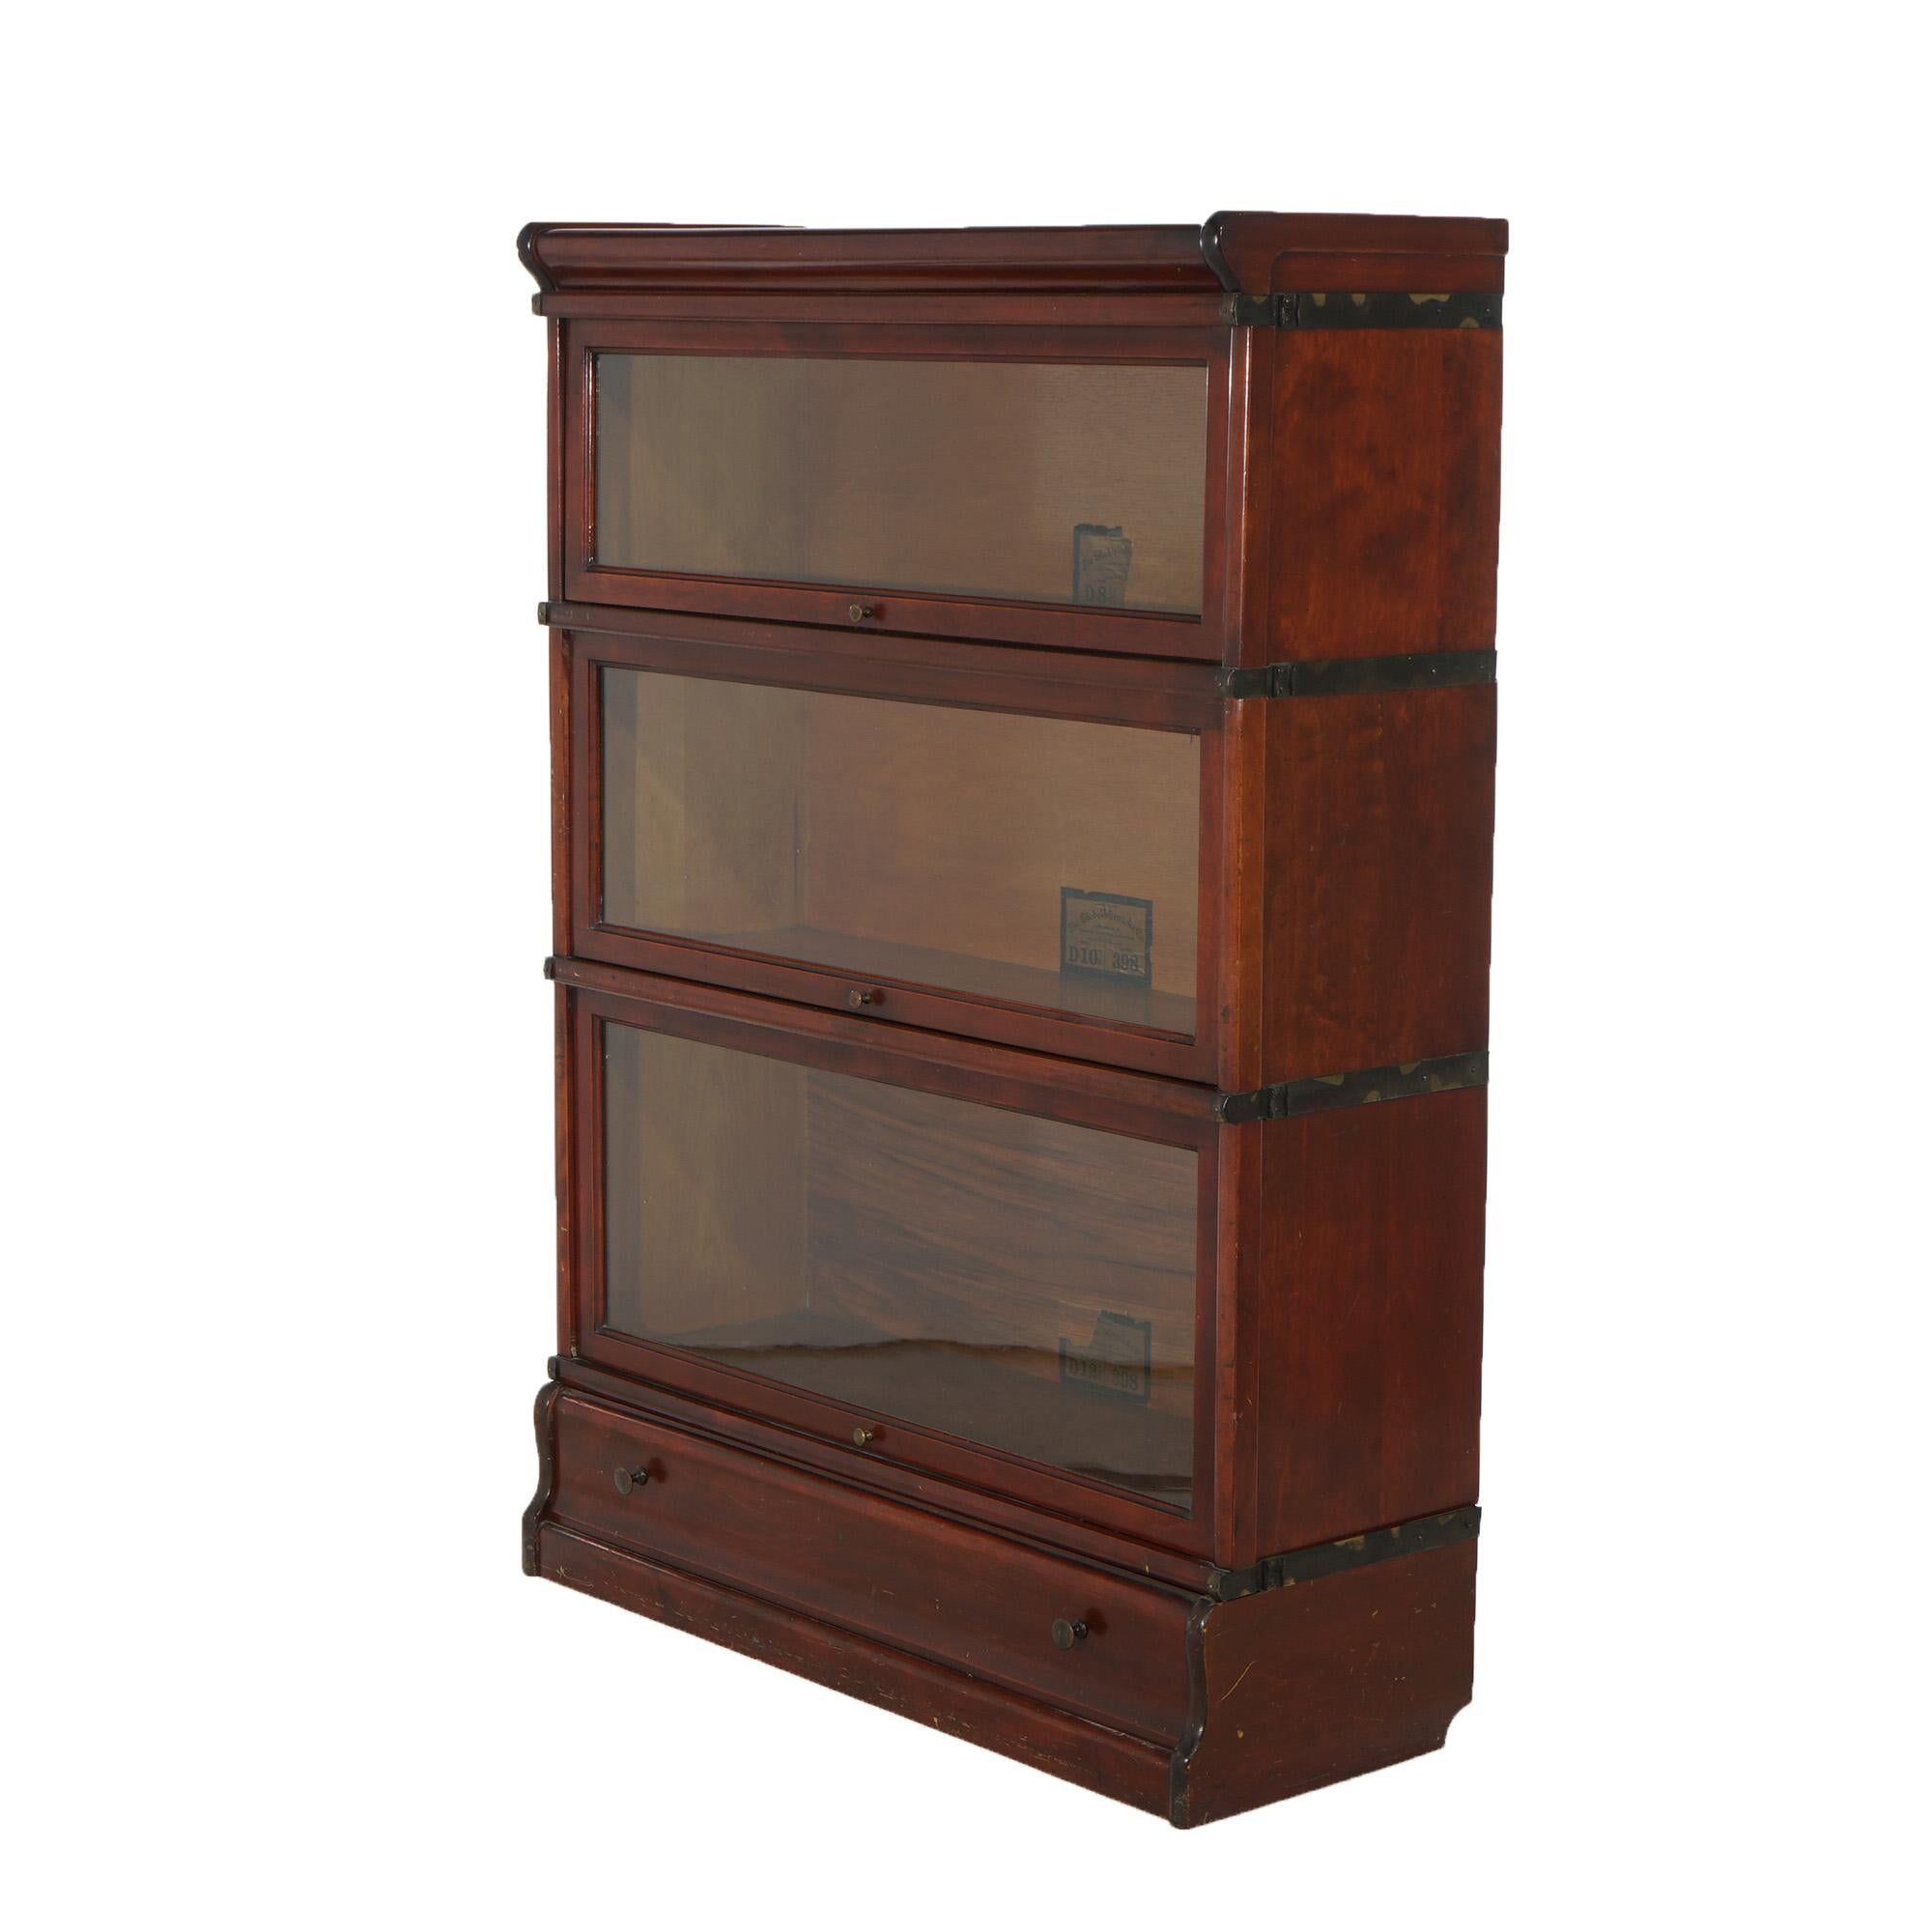 ***Ask About Reduced In-House Delivery Rates - Reliable Professional Service & Fully Insured***
An antique Arts and Crafts barrister bookcase by Globe Wernicke offers mahogany construction with three stacks, each having a pull out glass door, raised